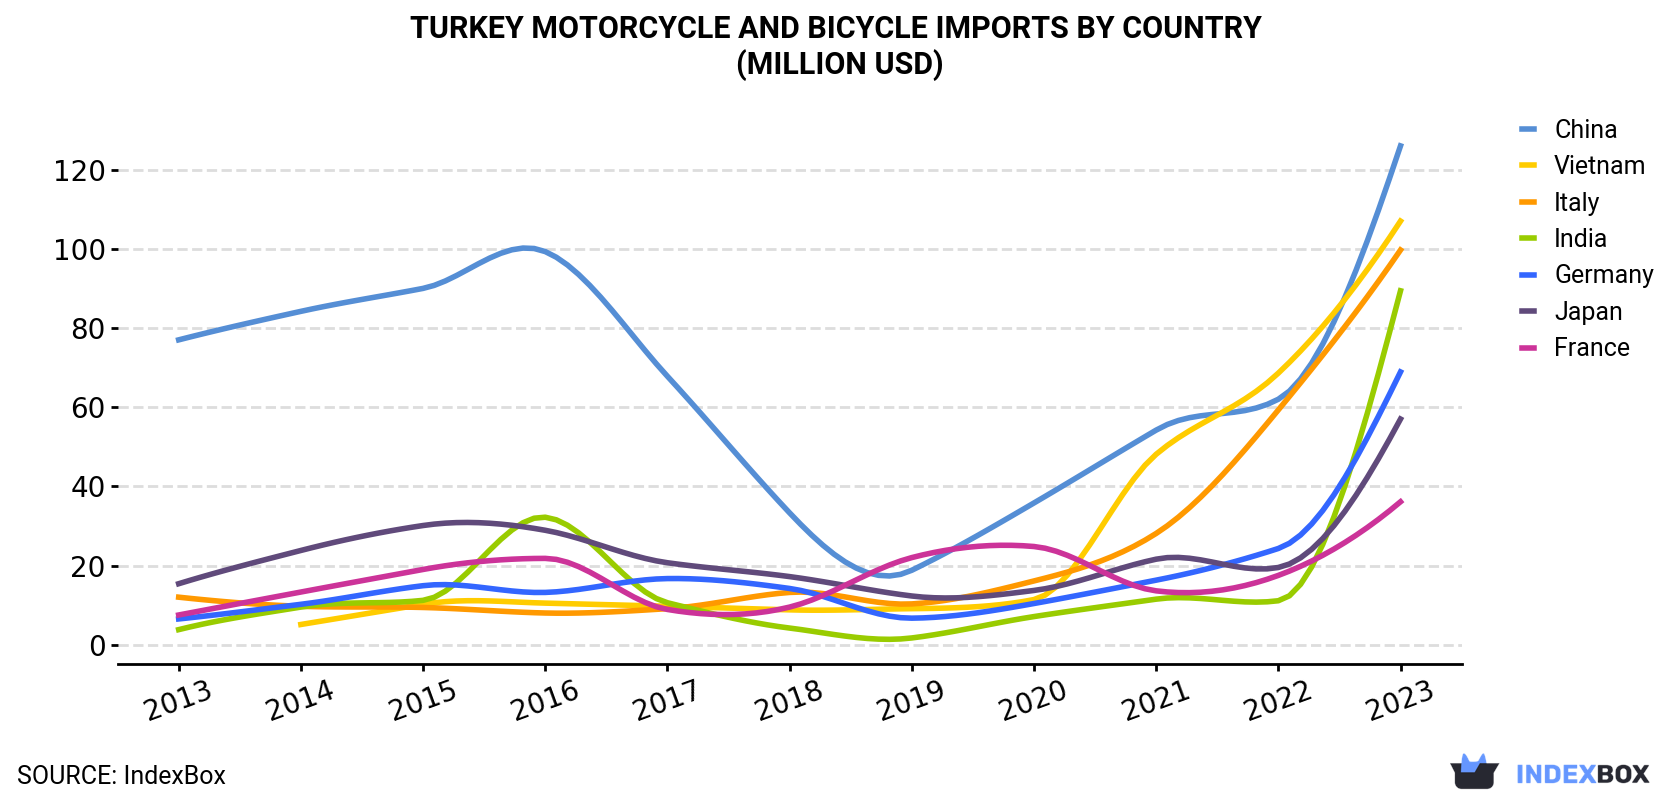 Turkey Motorcycle And Bicycle Imports By Country (Million USD)